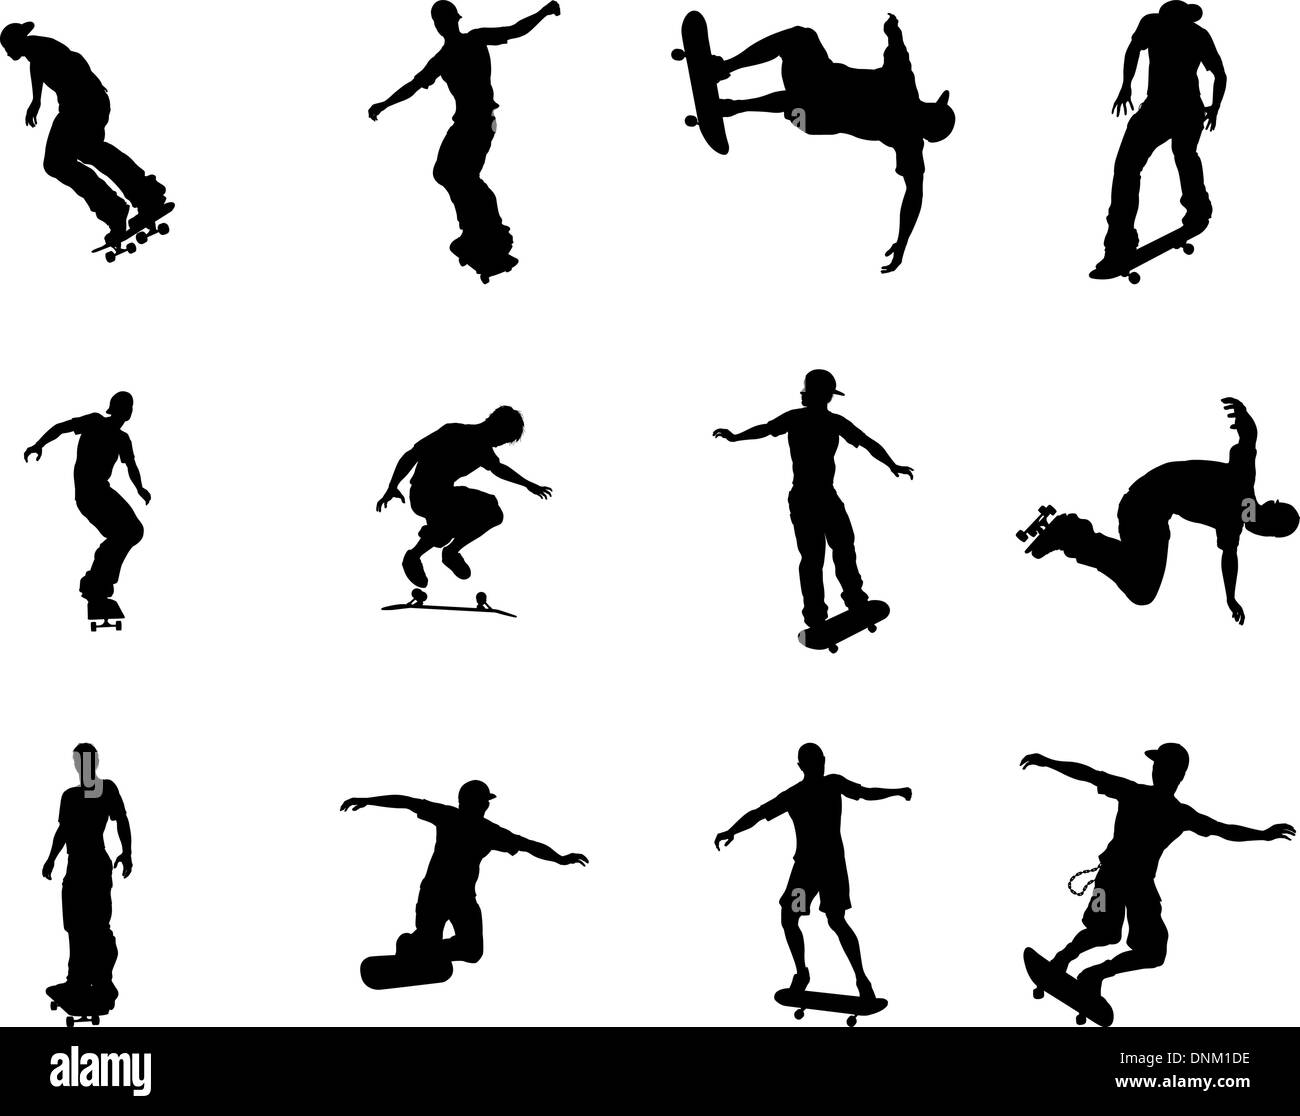 Very high quality and highly detailed skating skateboarder silhouette outlines. Stock Vector